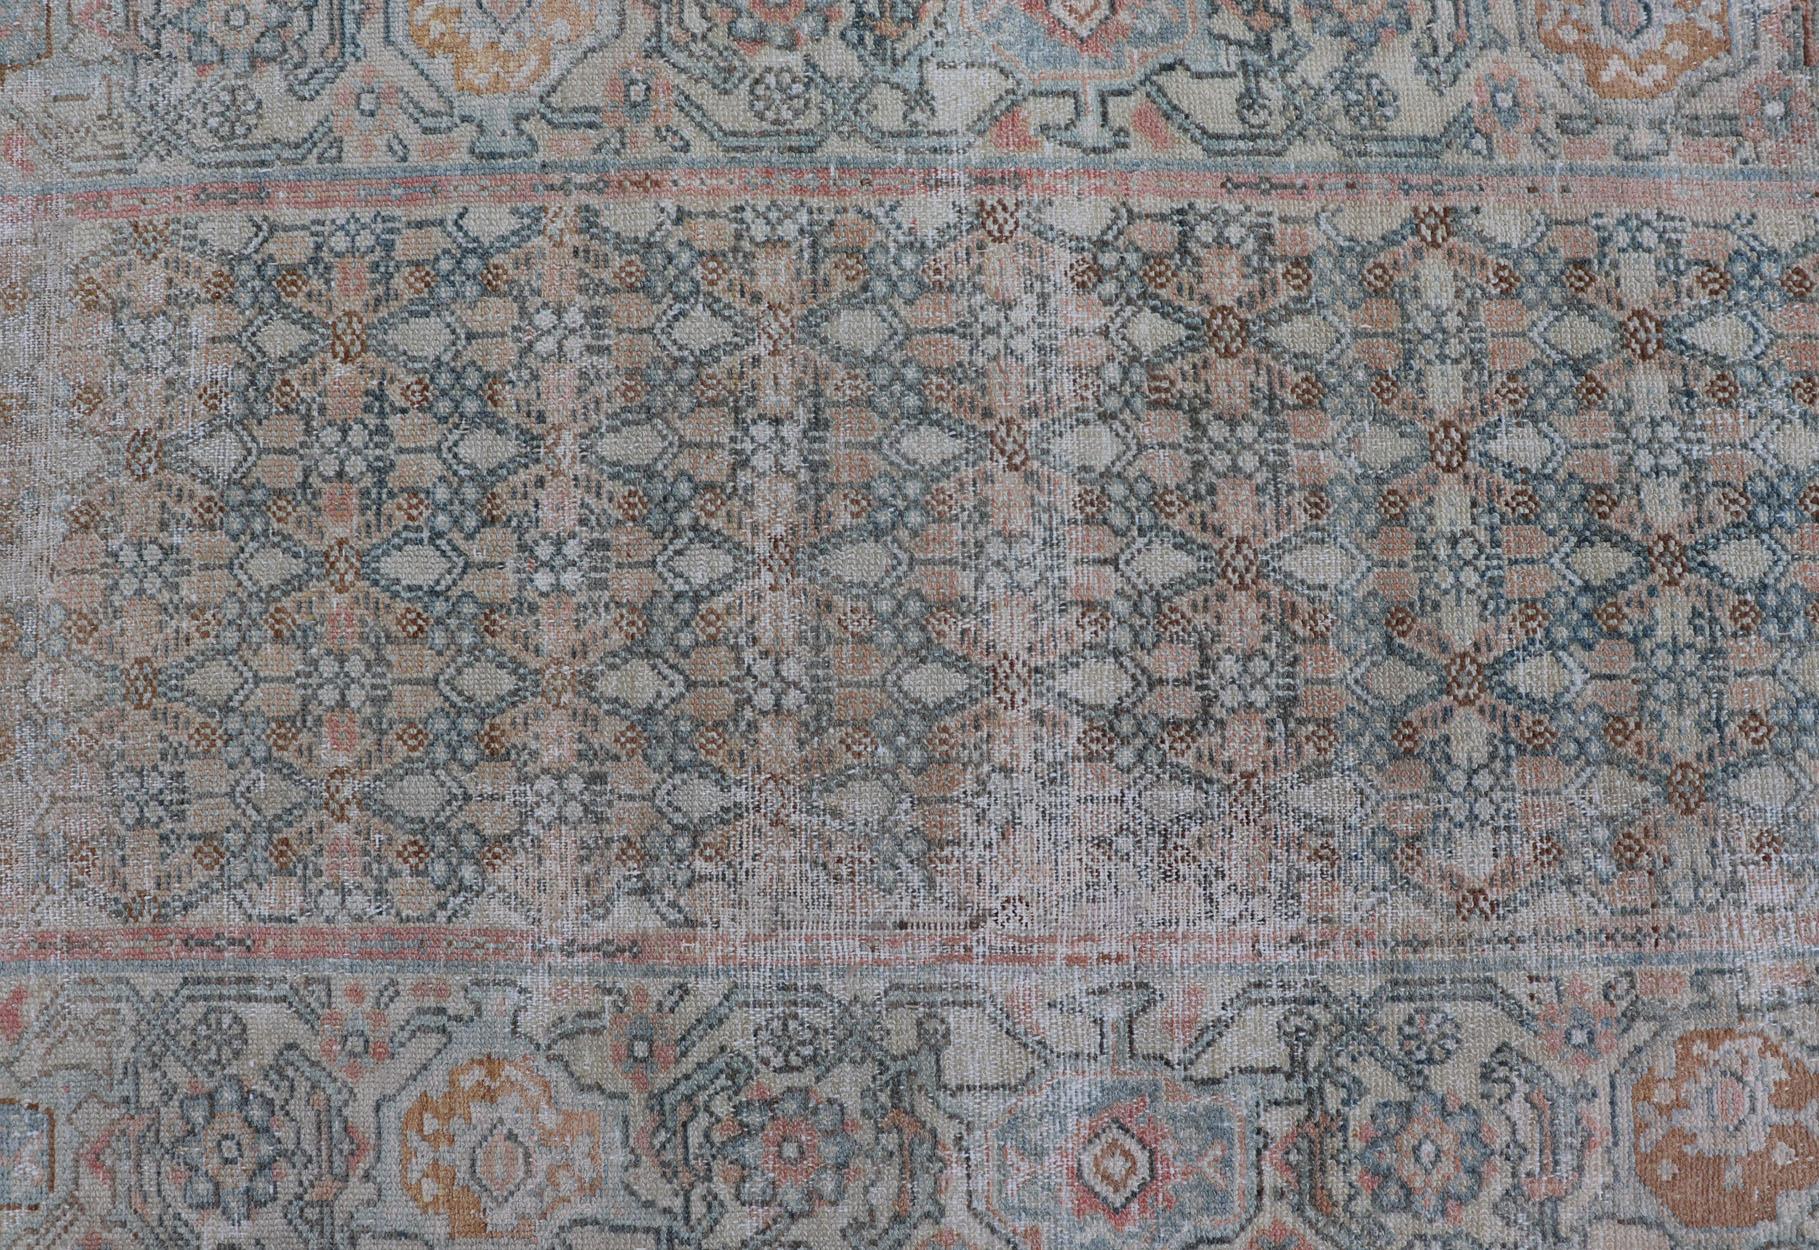 Fine Persian Malayer Runner in Soft Tones of Blue, Salmon, Pink, Peach & Orange For Sale 9